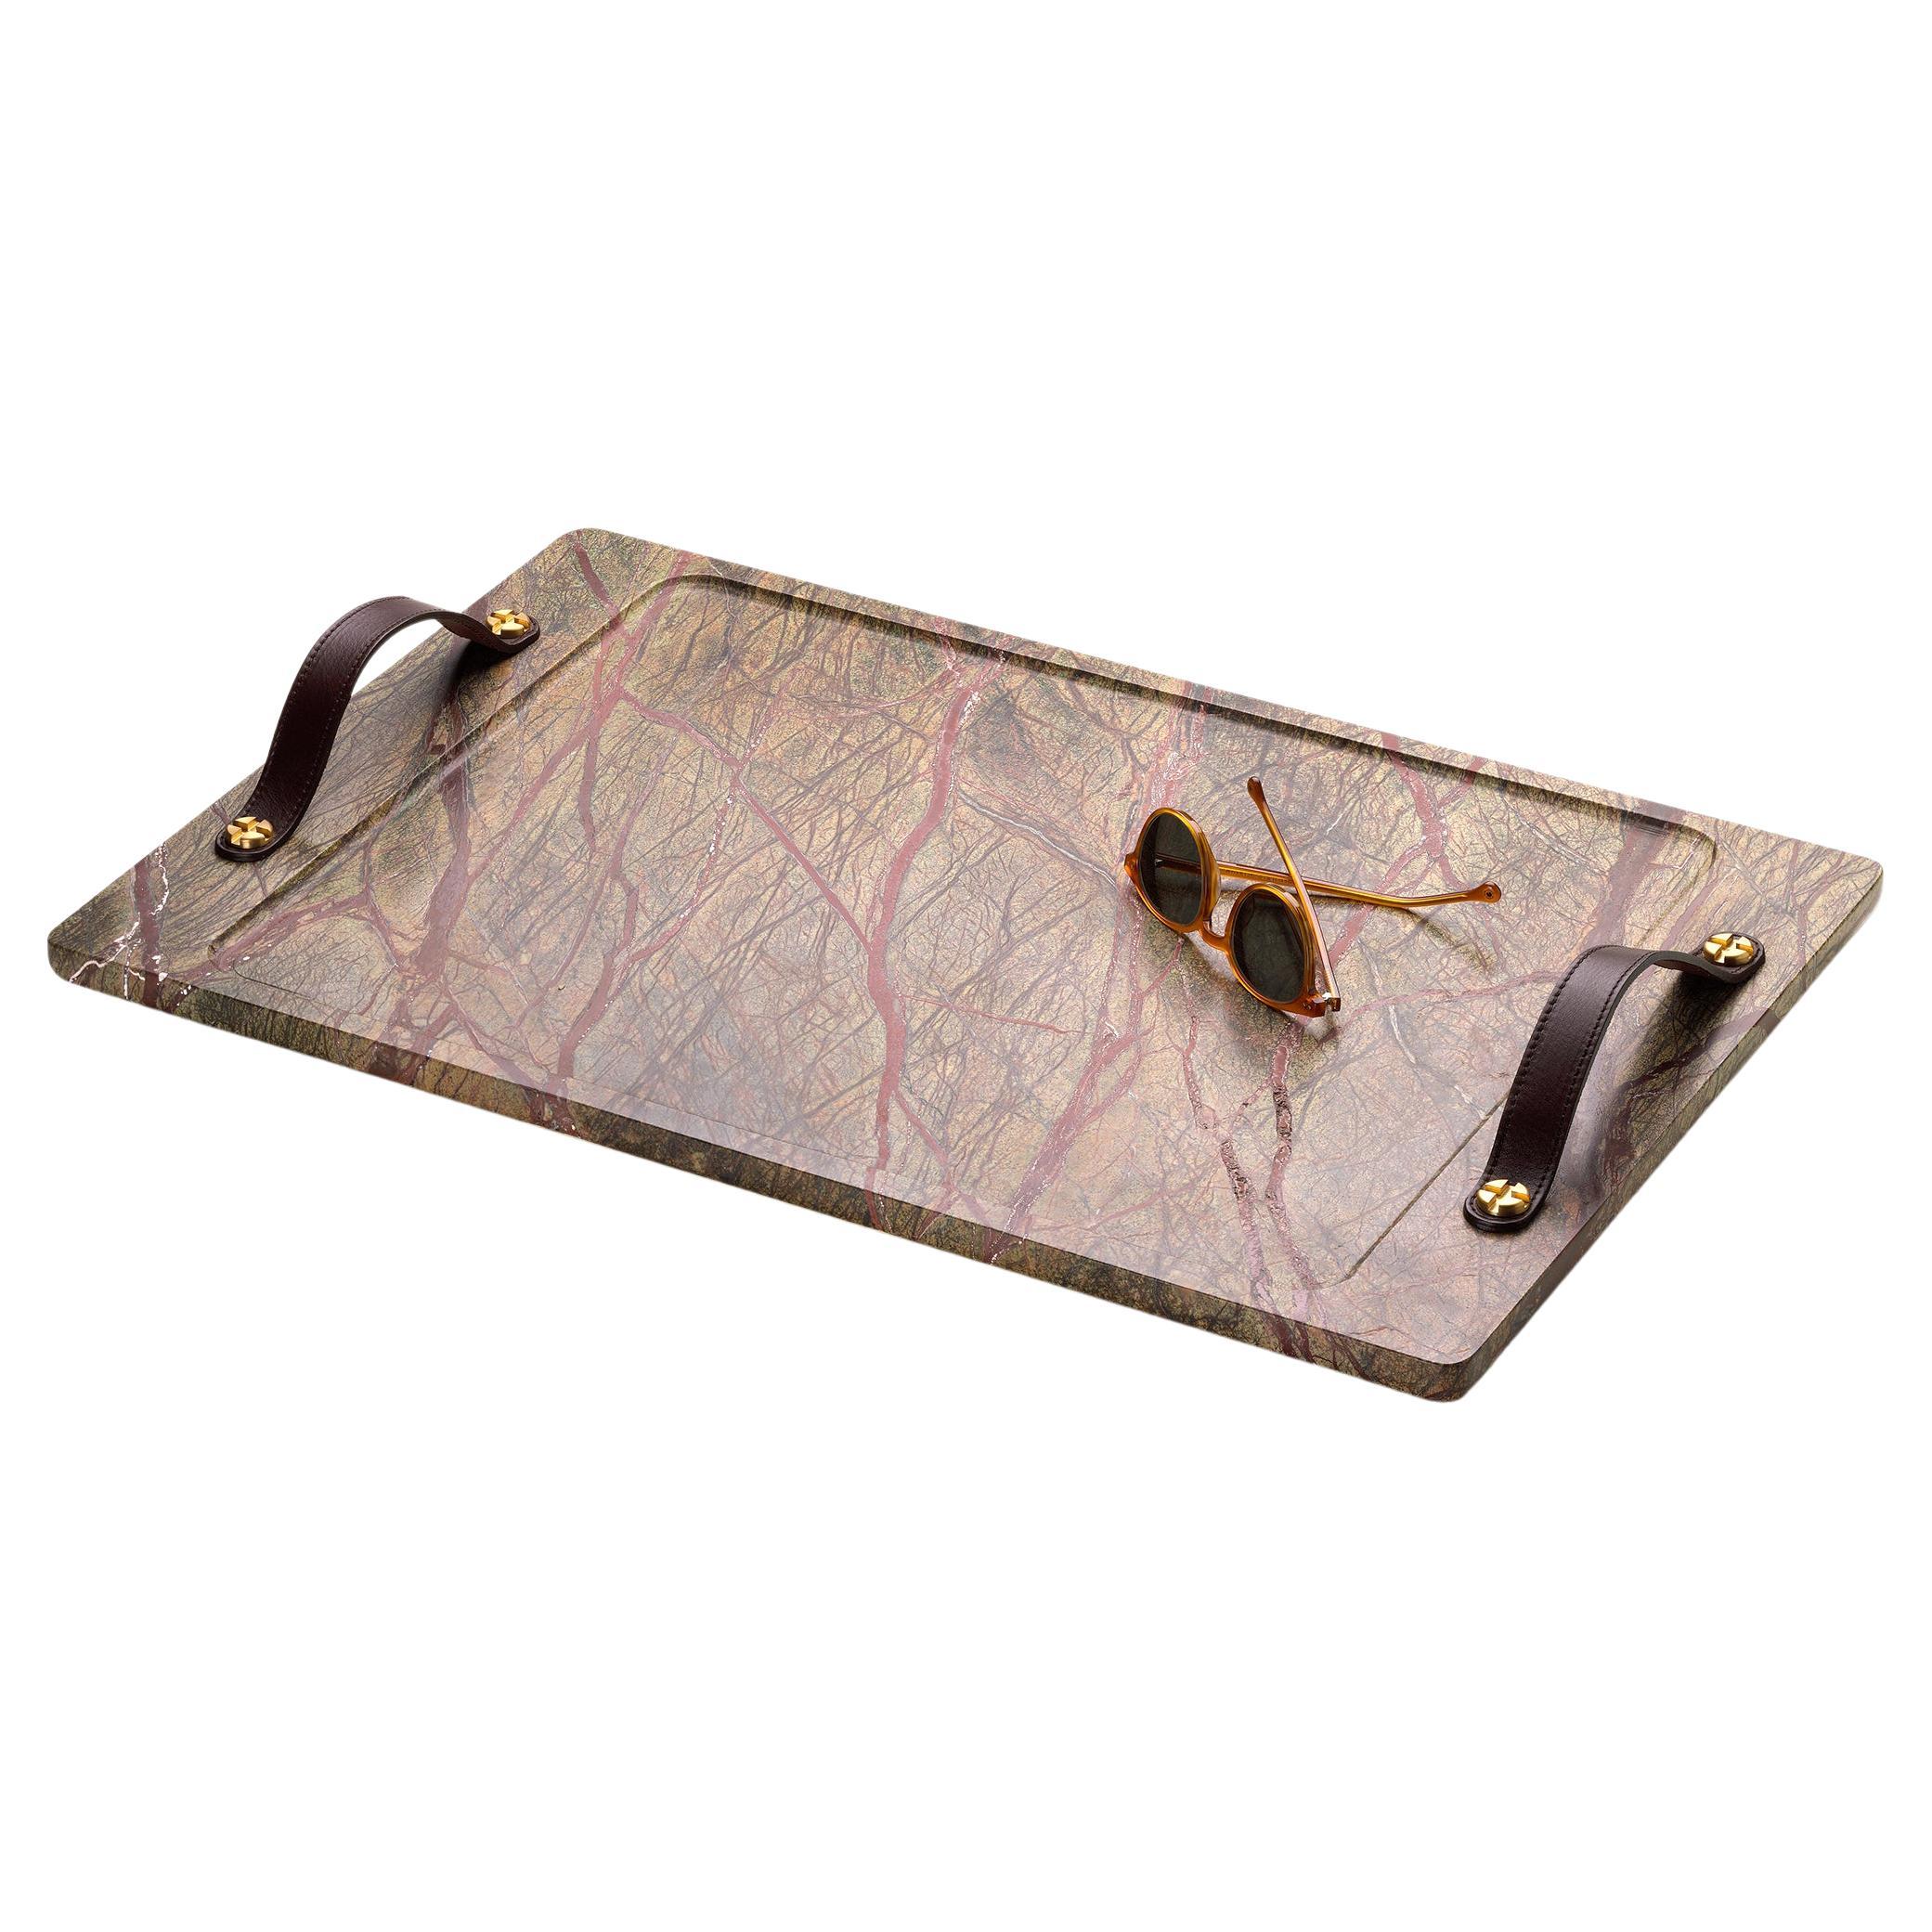 Bidasar Marble trays with leather straps and brass bottom reinforcement. Bidasar Marble Tray with an unfinished texture. Rain forest Indian marble, also known as Bidasar, is the finest and superior quality of Indian marbles. The stone shows the